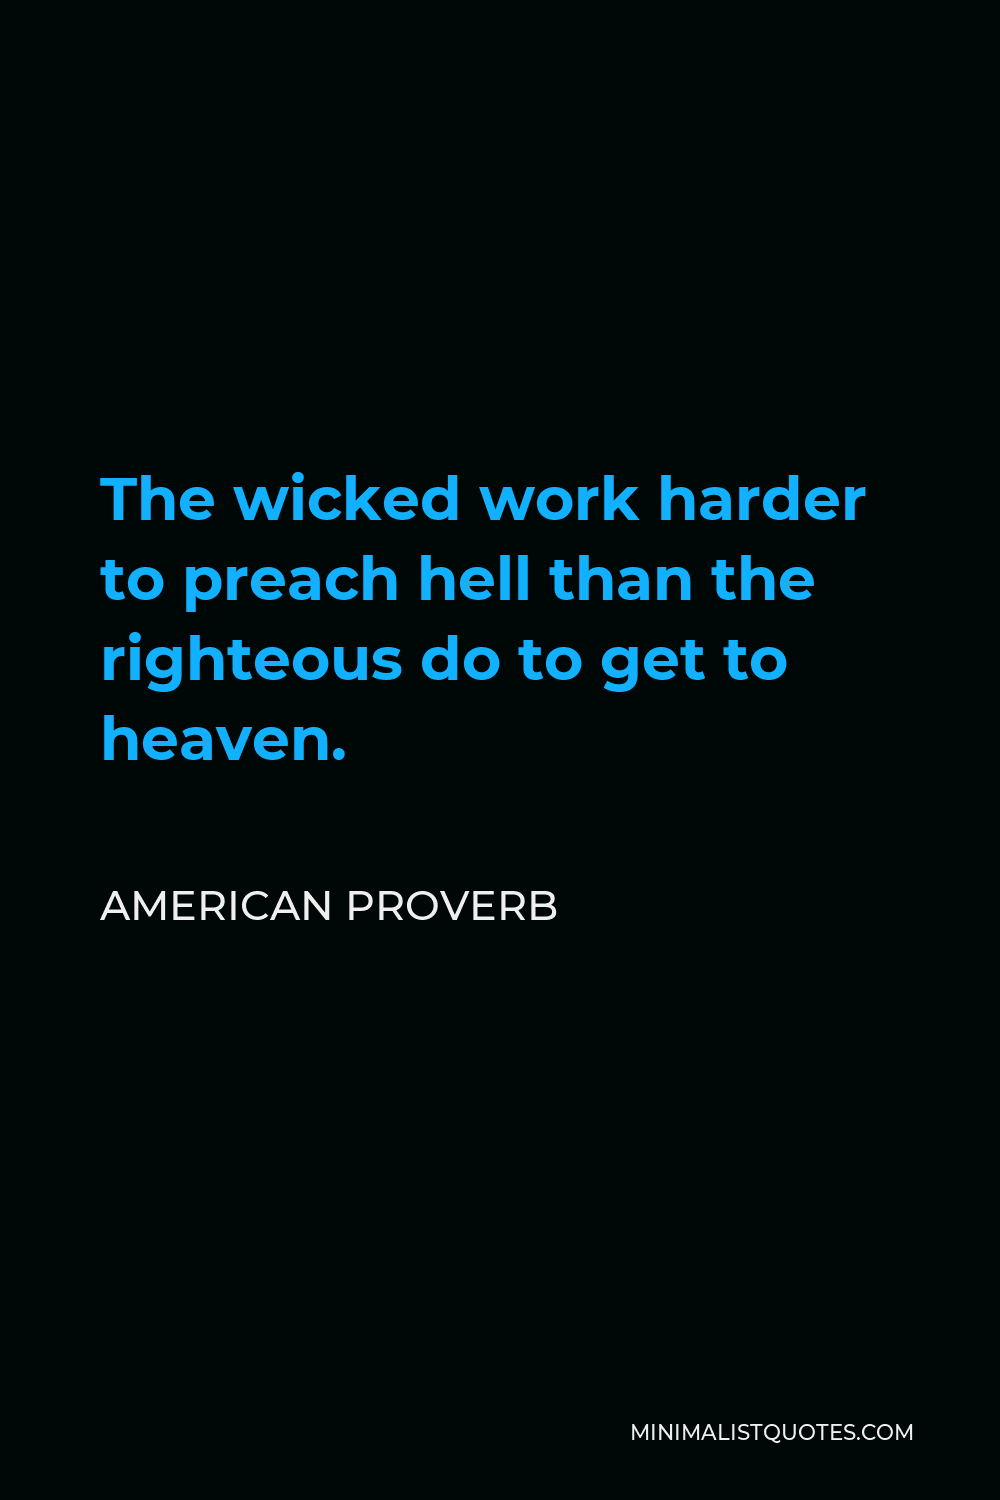 American Proverb Quote - The wicked work harder to preach hell than the righteous do to get to heaven.